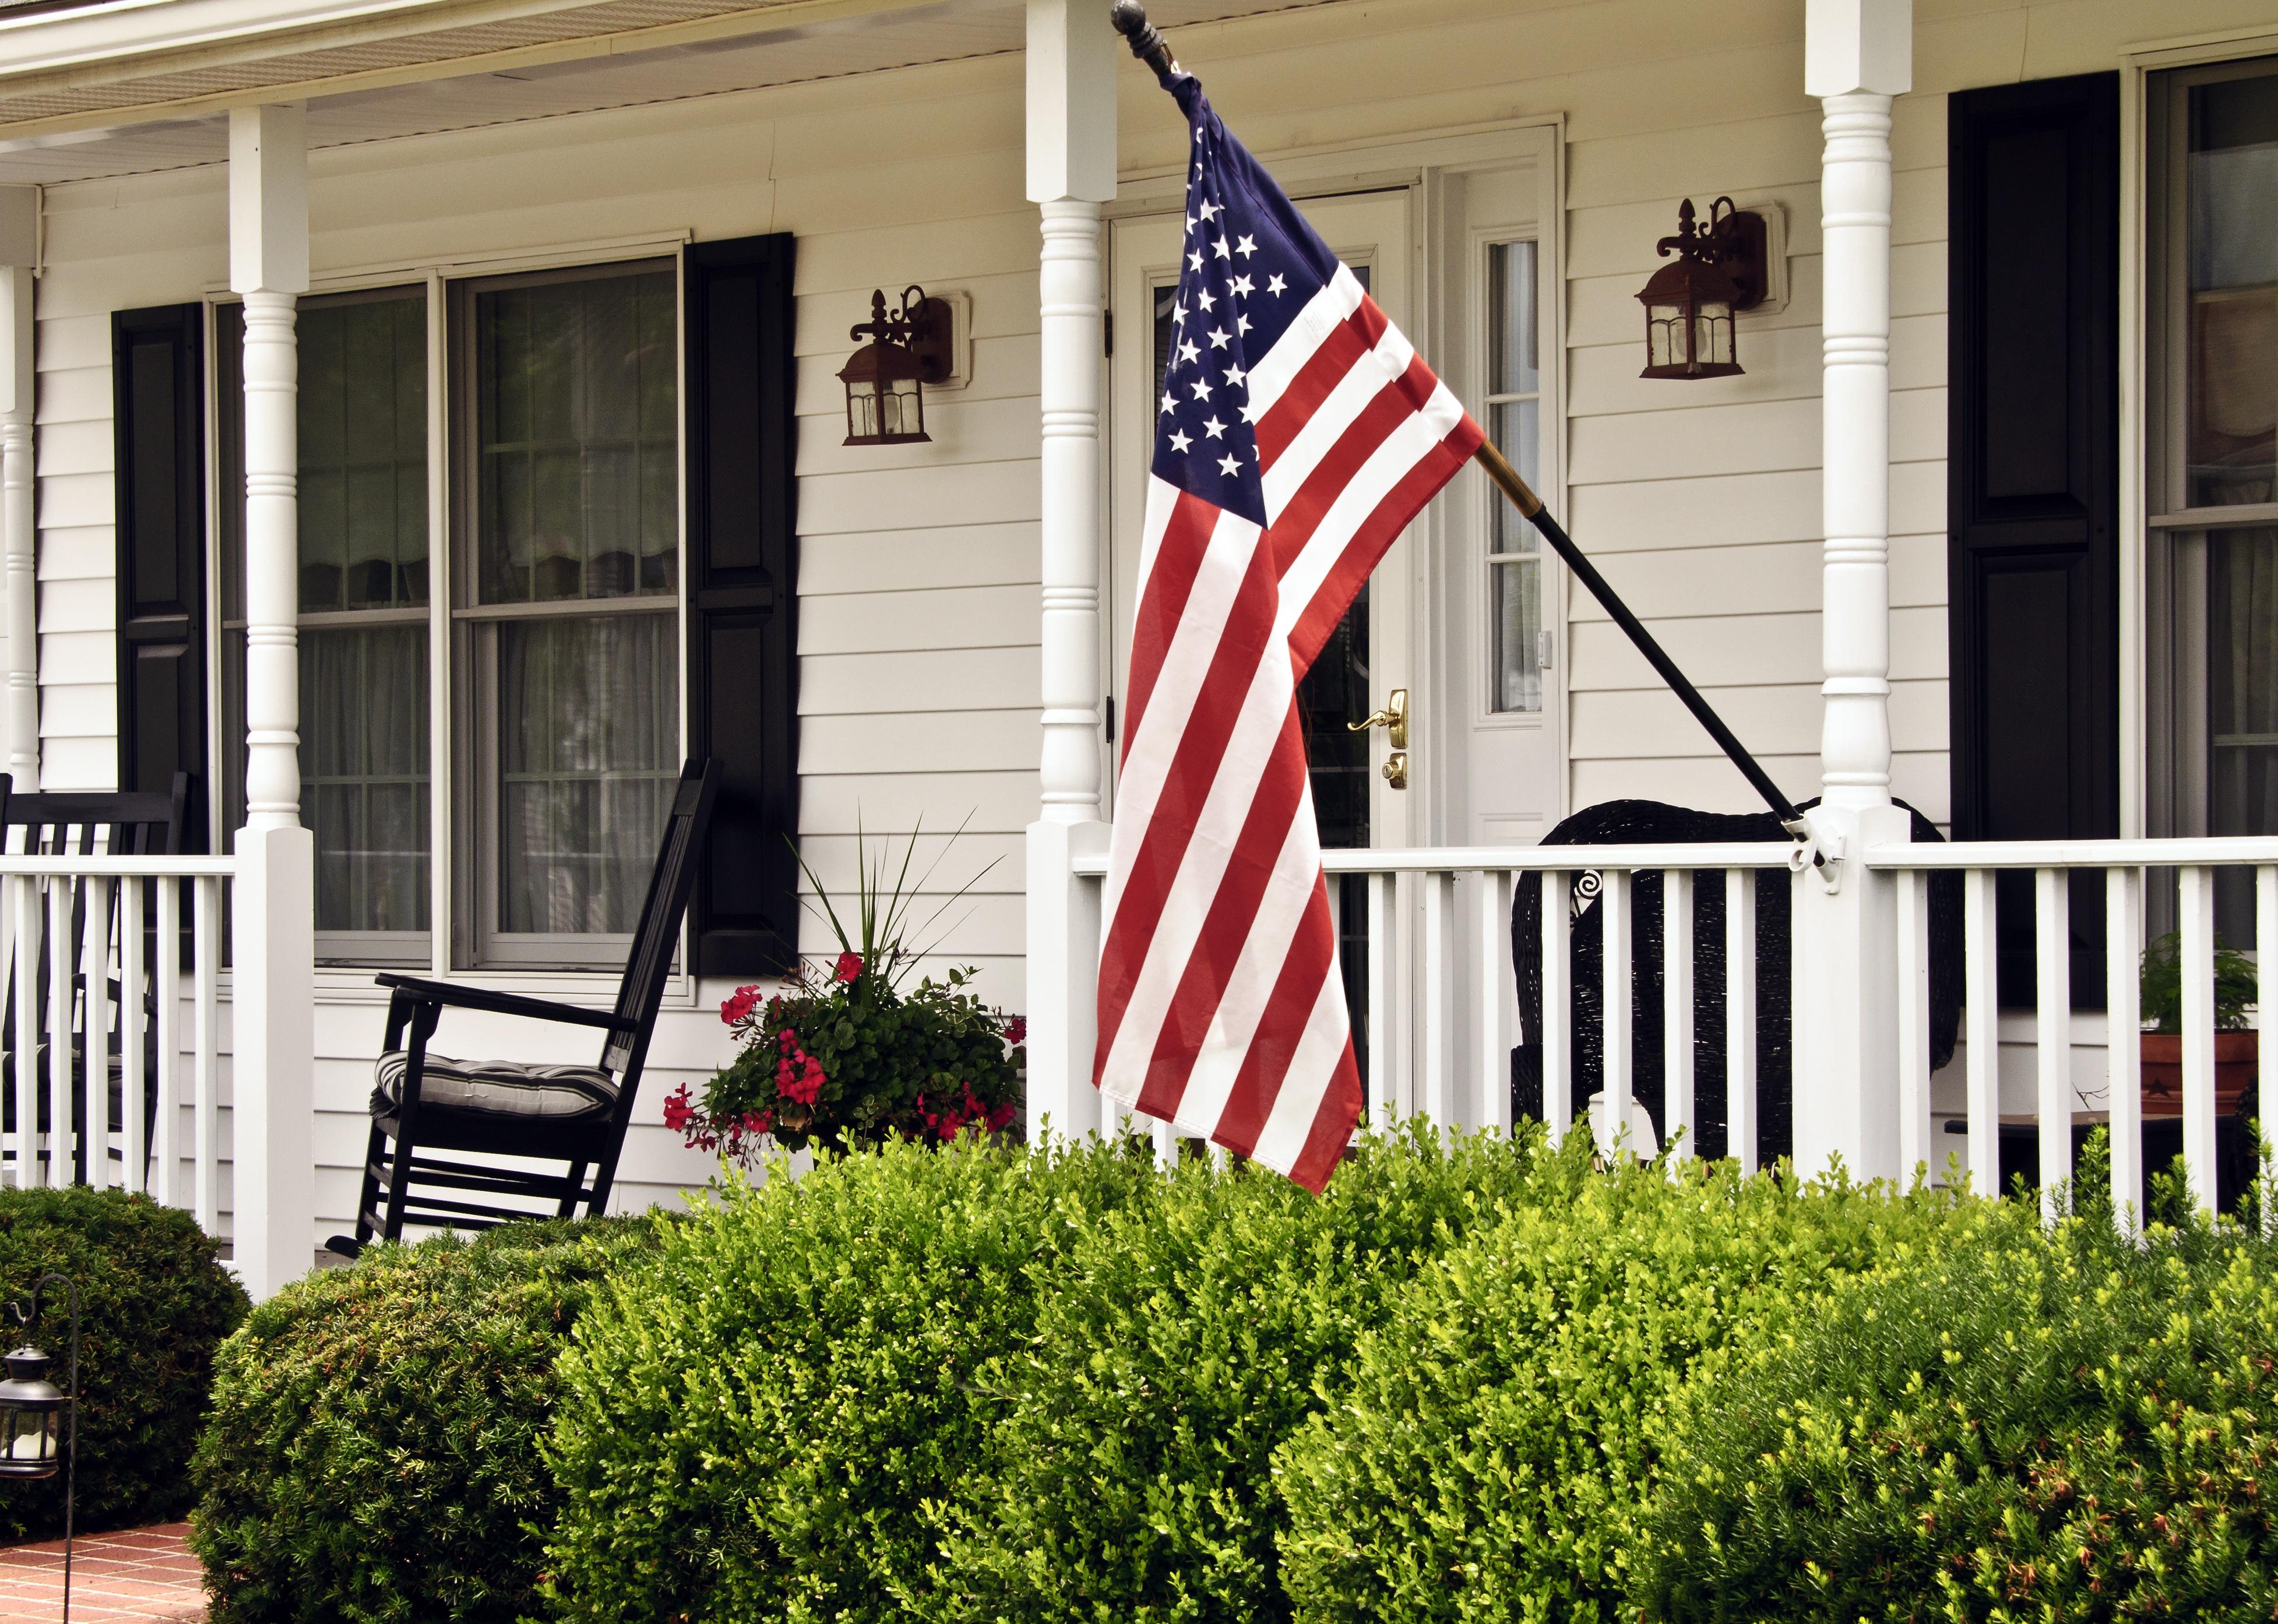 Porch of white colonial-style home with black shutters and American flag.